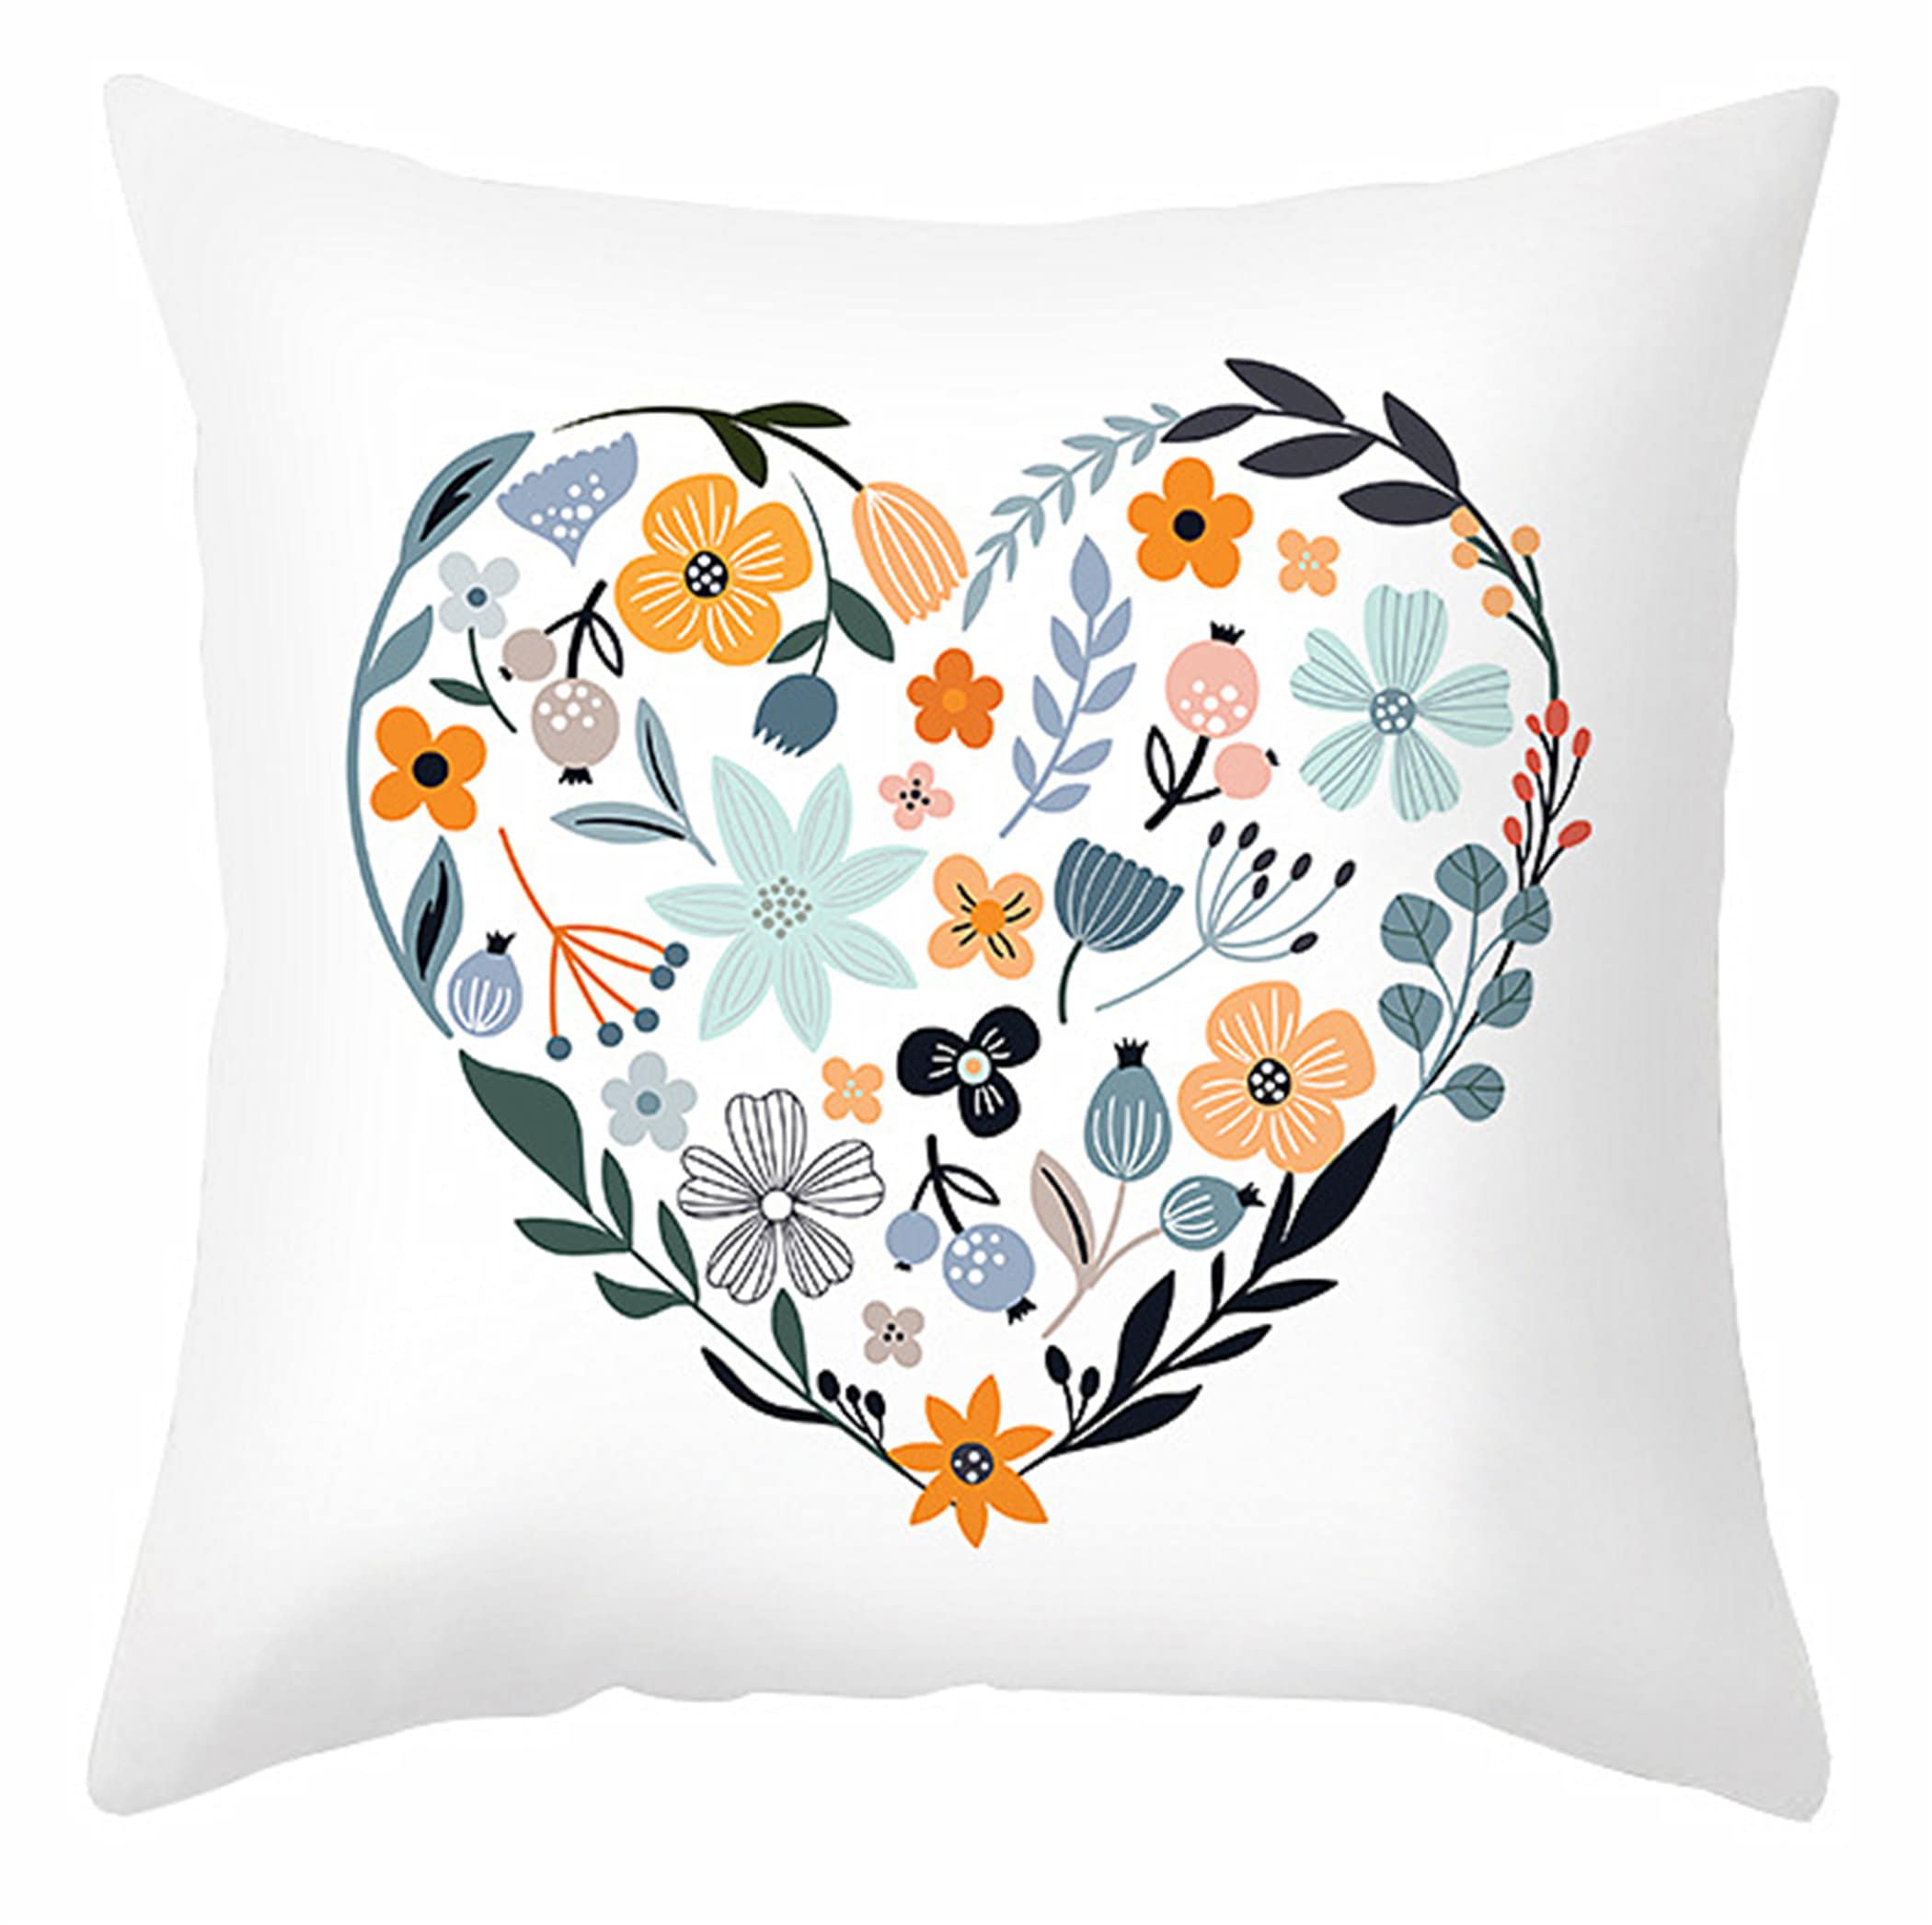 Embroidered Cameo 18x18 Pillow Cover – noraokafor